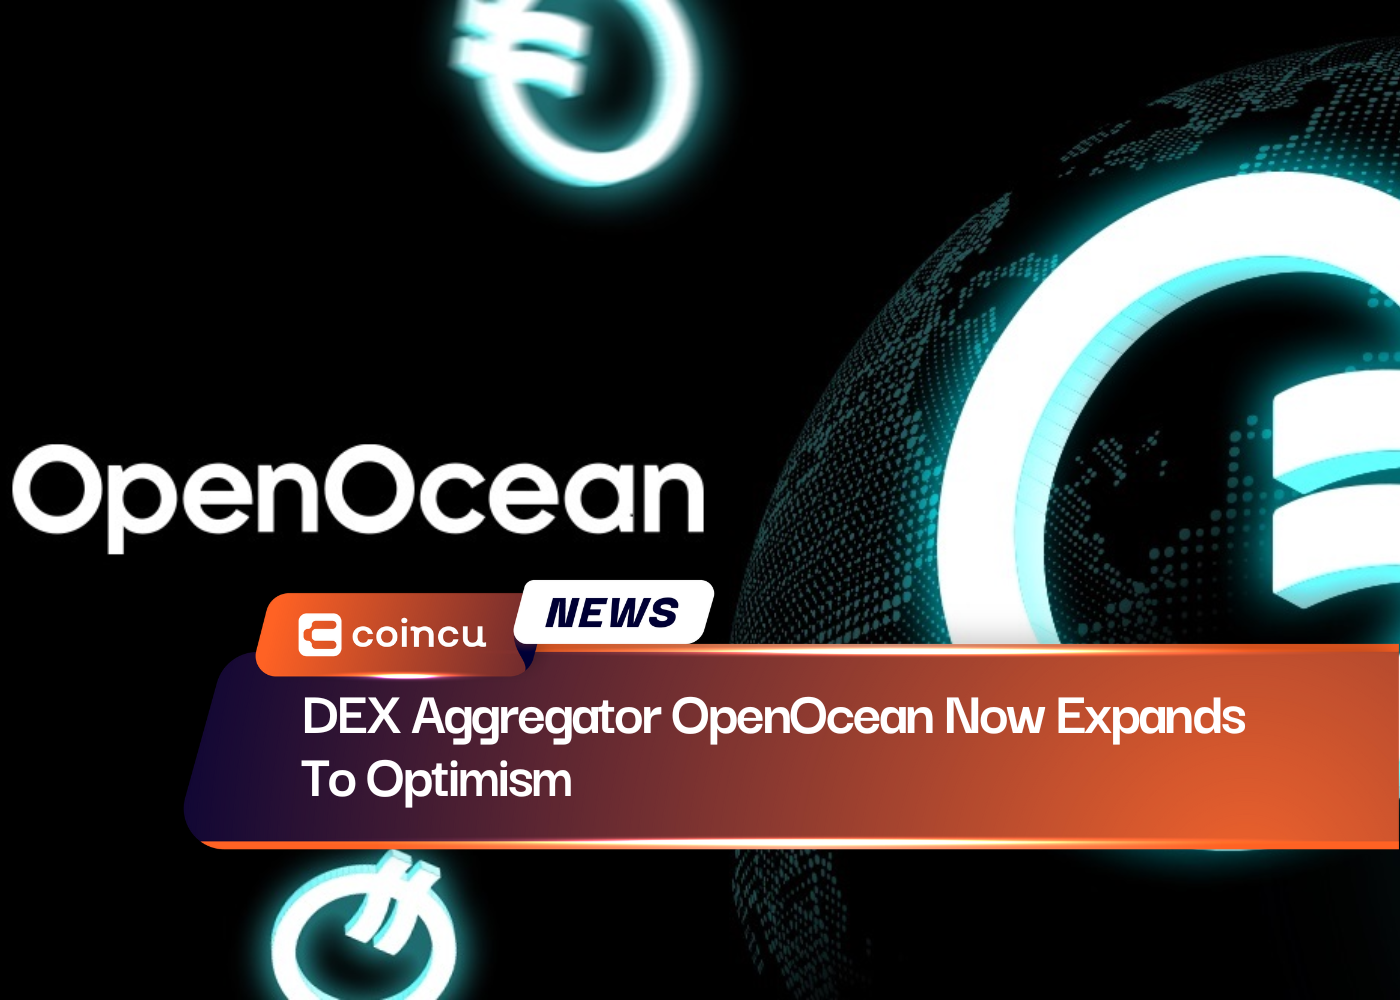 DEX Aggregator OpenOcean Now Expands To Optimism